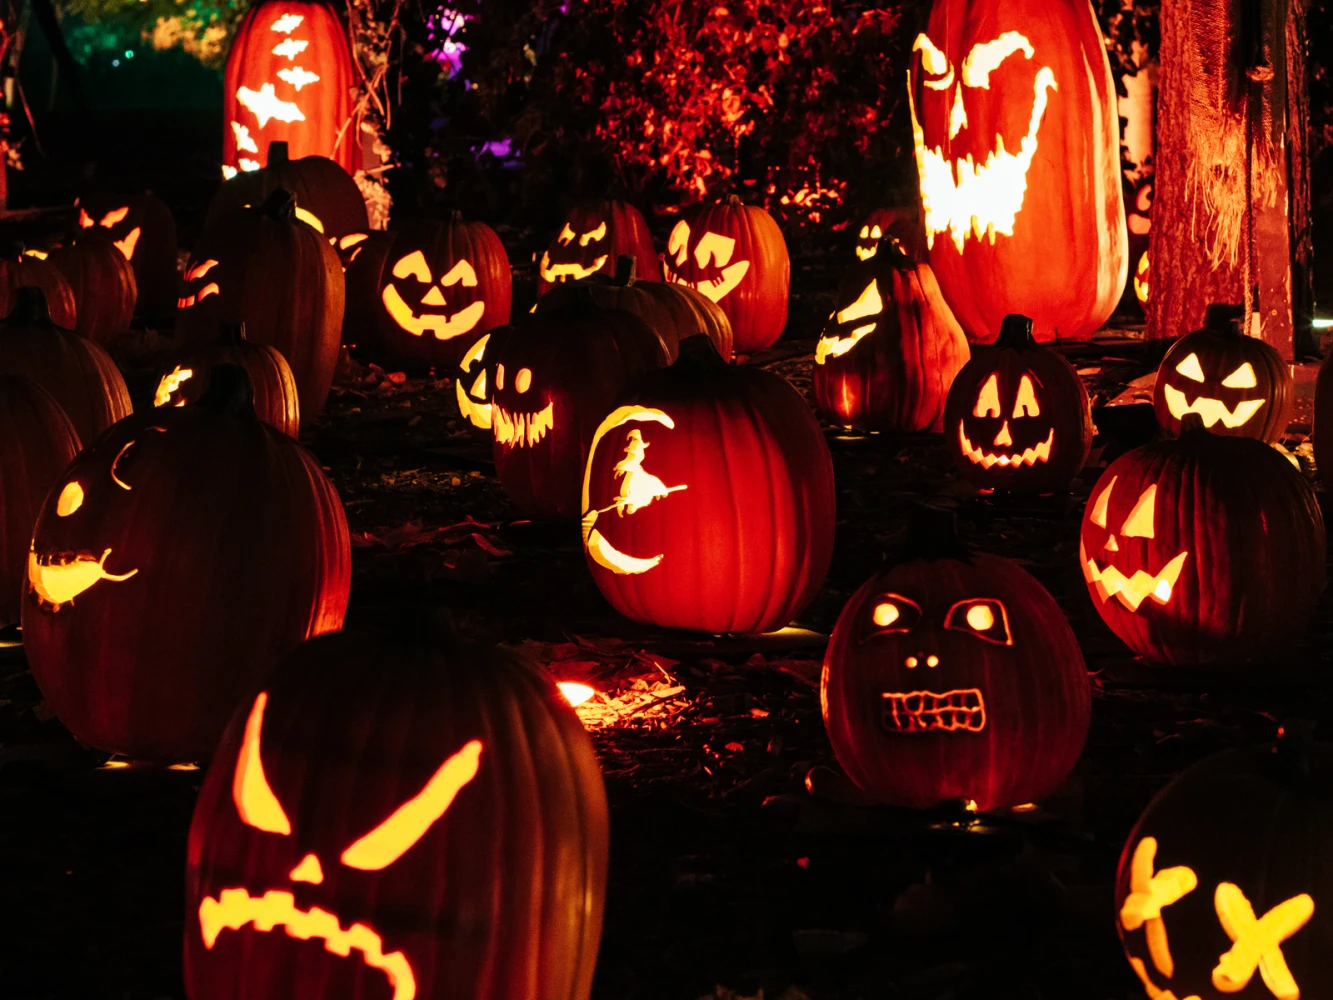 Magic of the Jack O’Lanterns: What to expect - 6